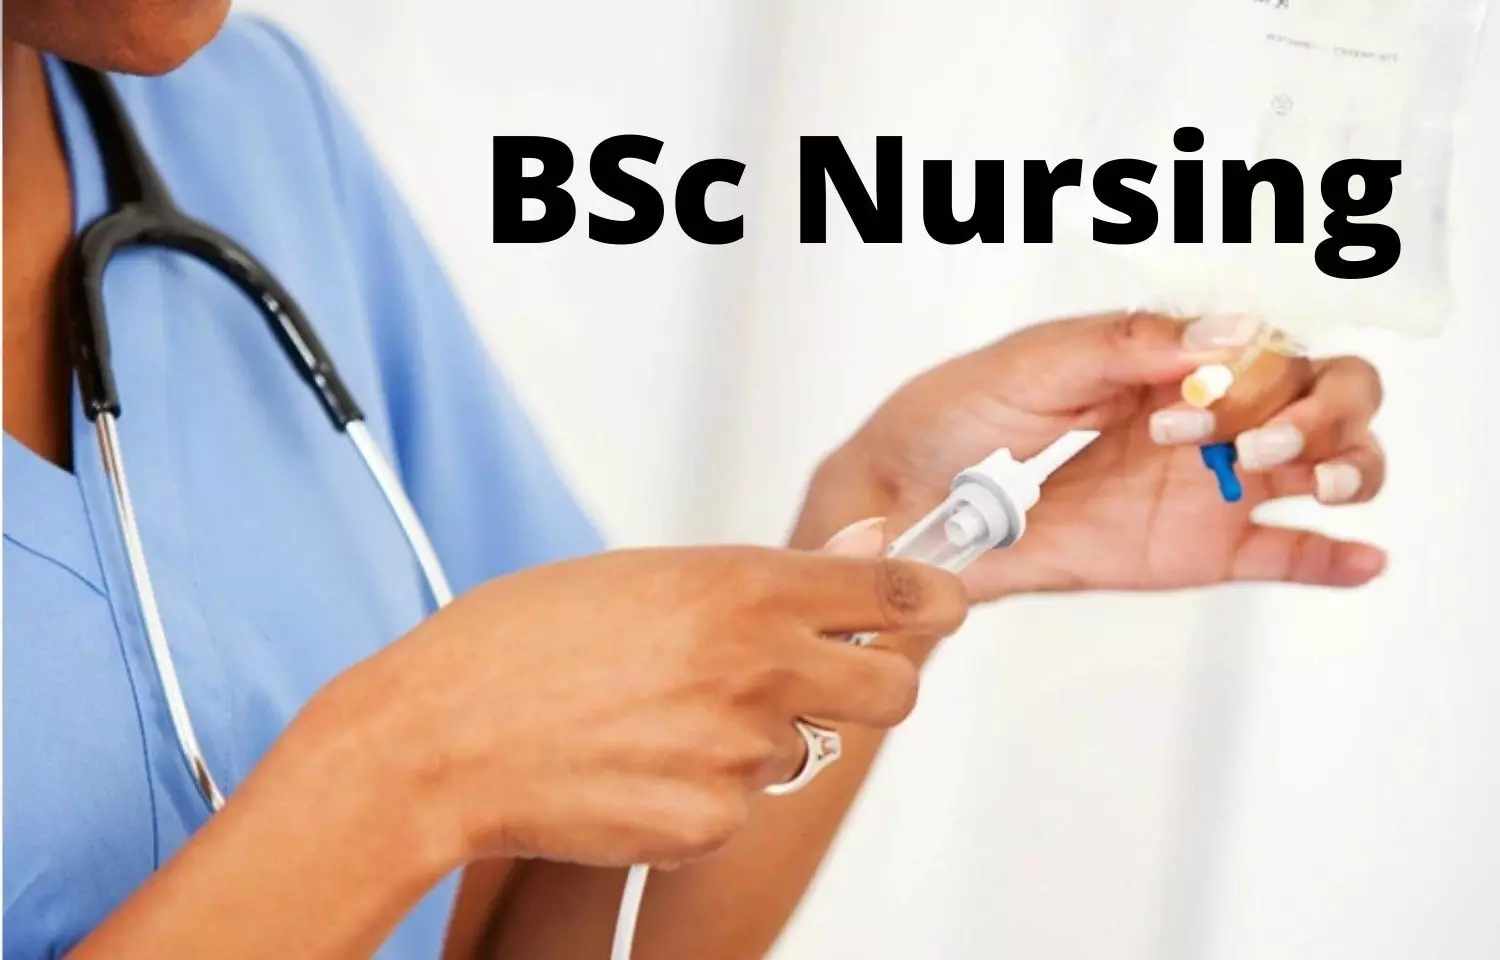 JIPMER to hold Final Mop-up Counselling for BSc Nursing admissions tomorrow, Check out Details